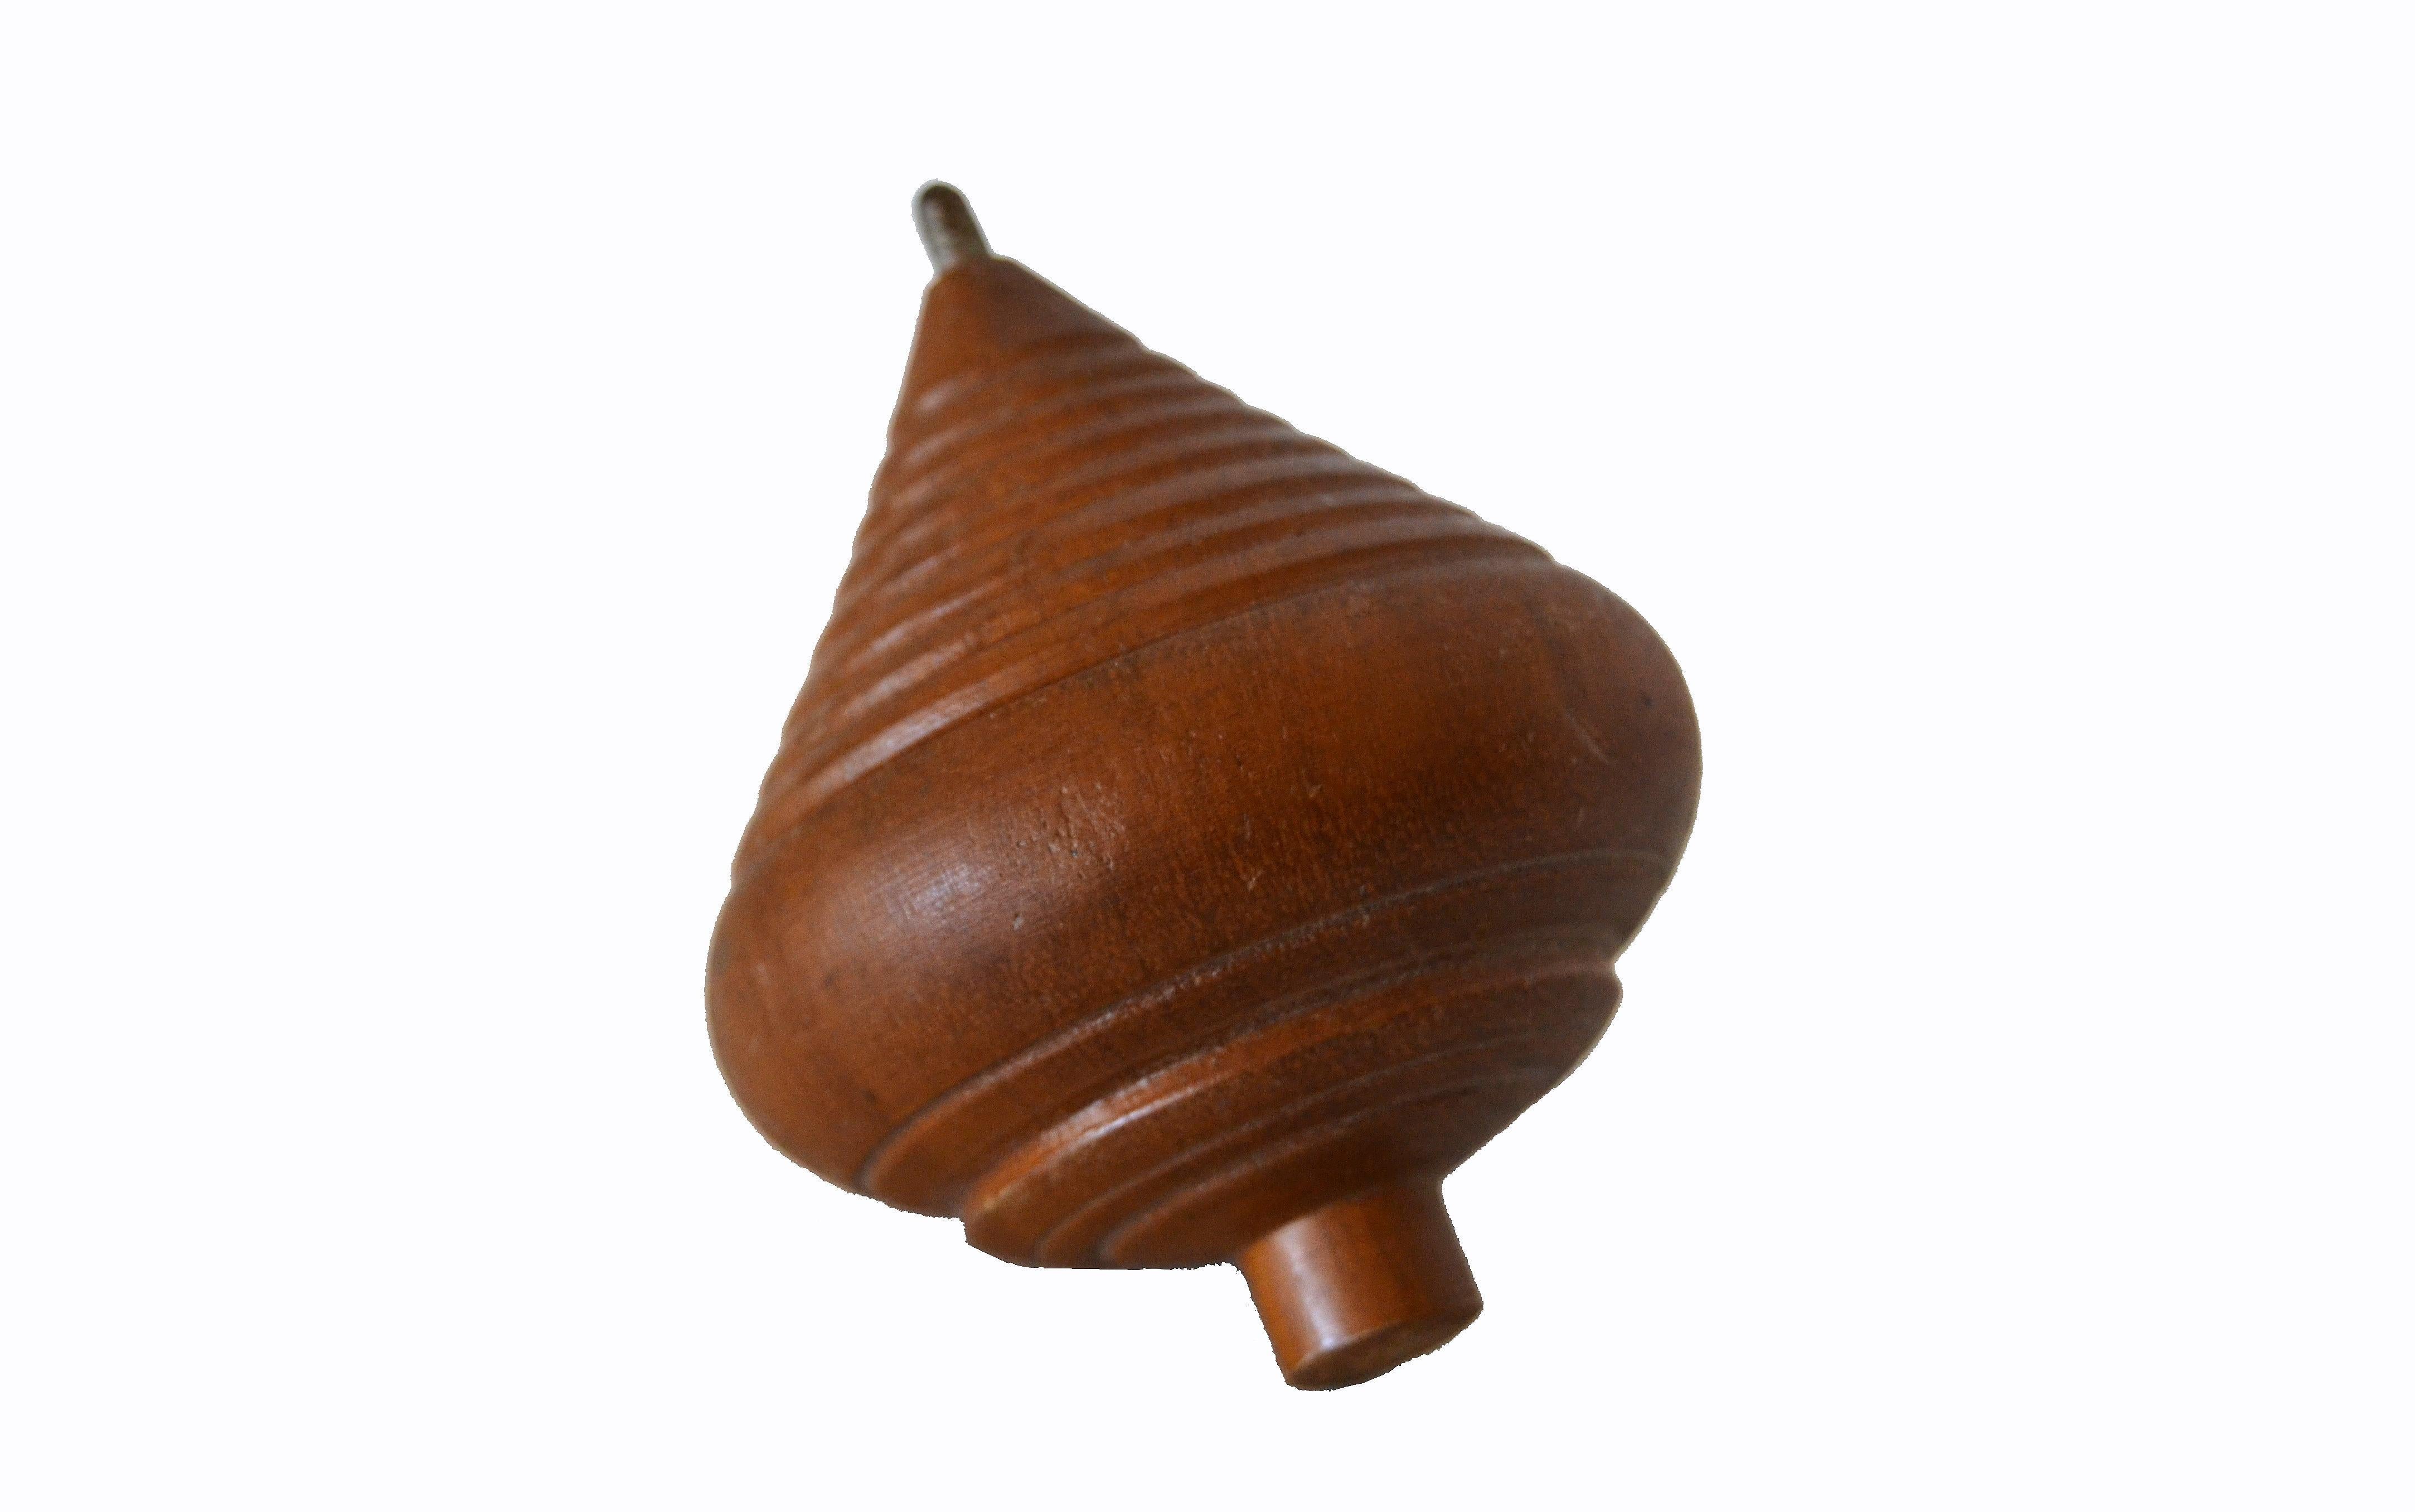 American Mid-Century Modern Woodworking Turned Walnut Wood Spinning Top Toy For Sale 1